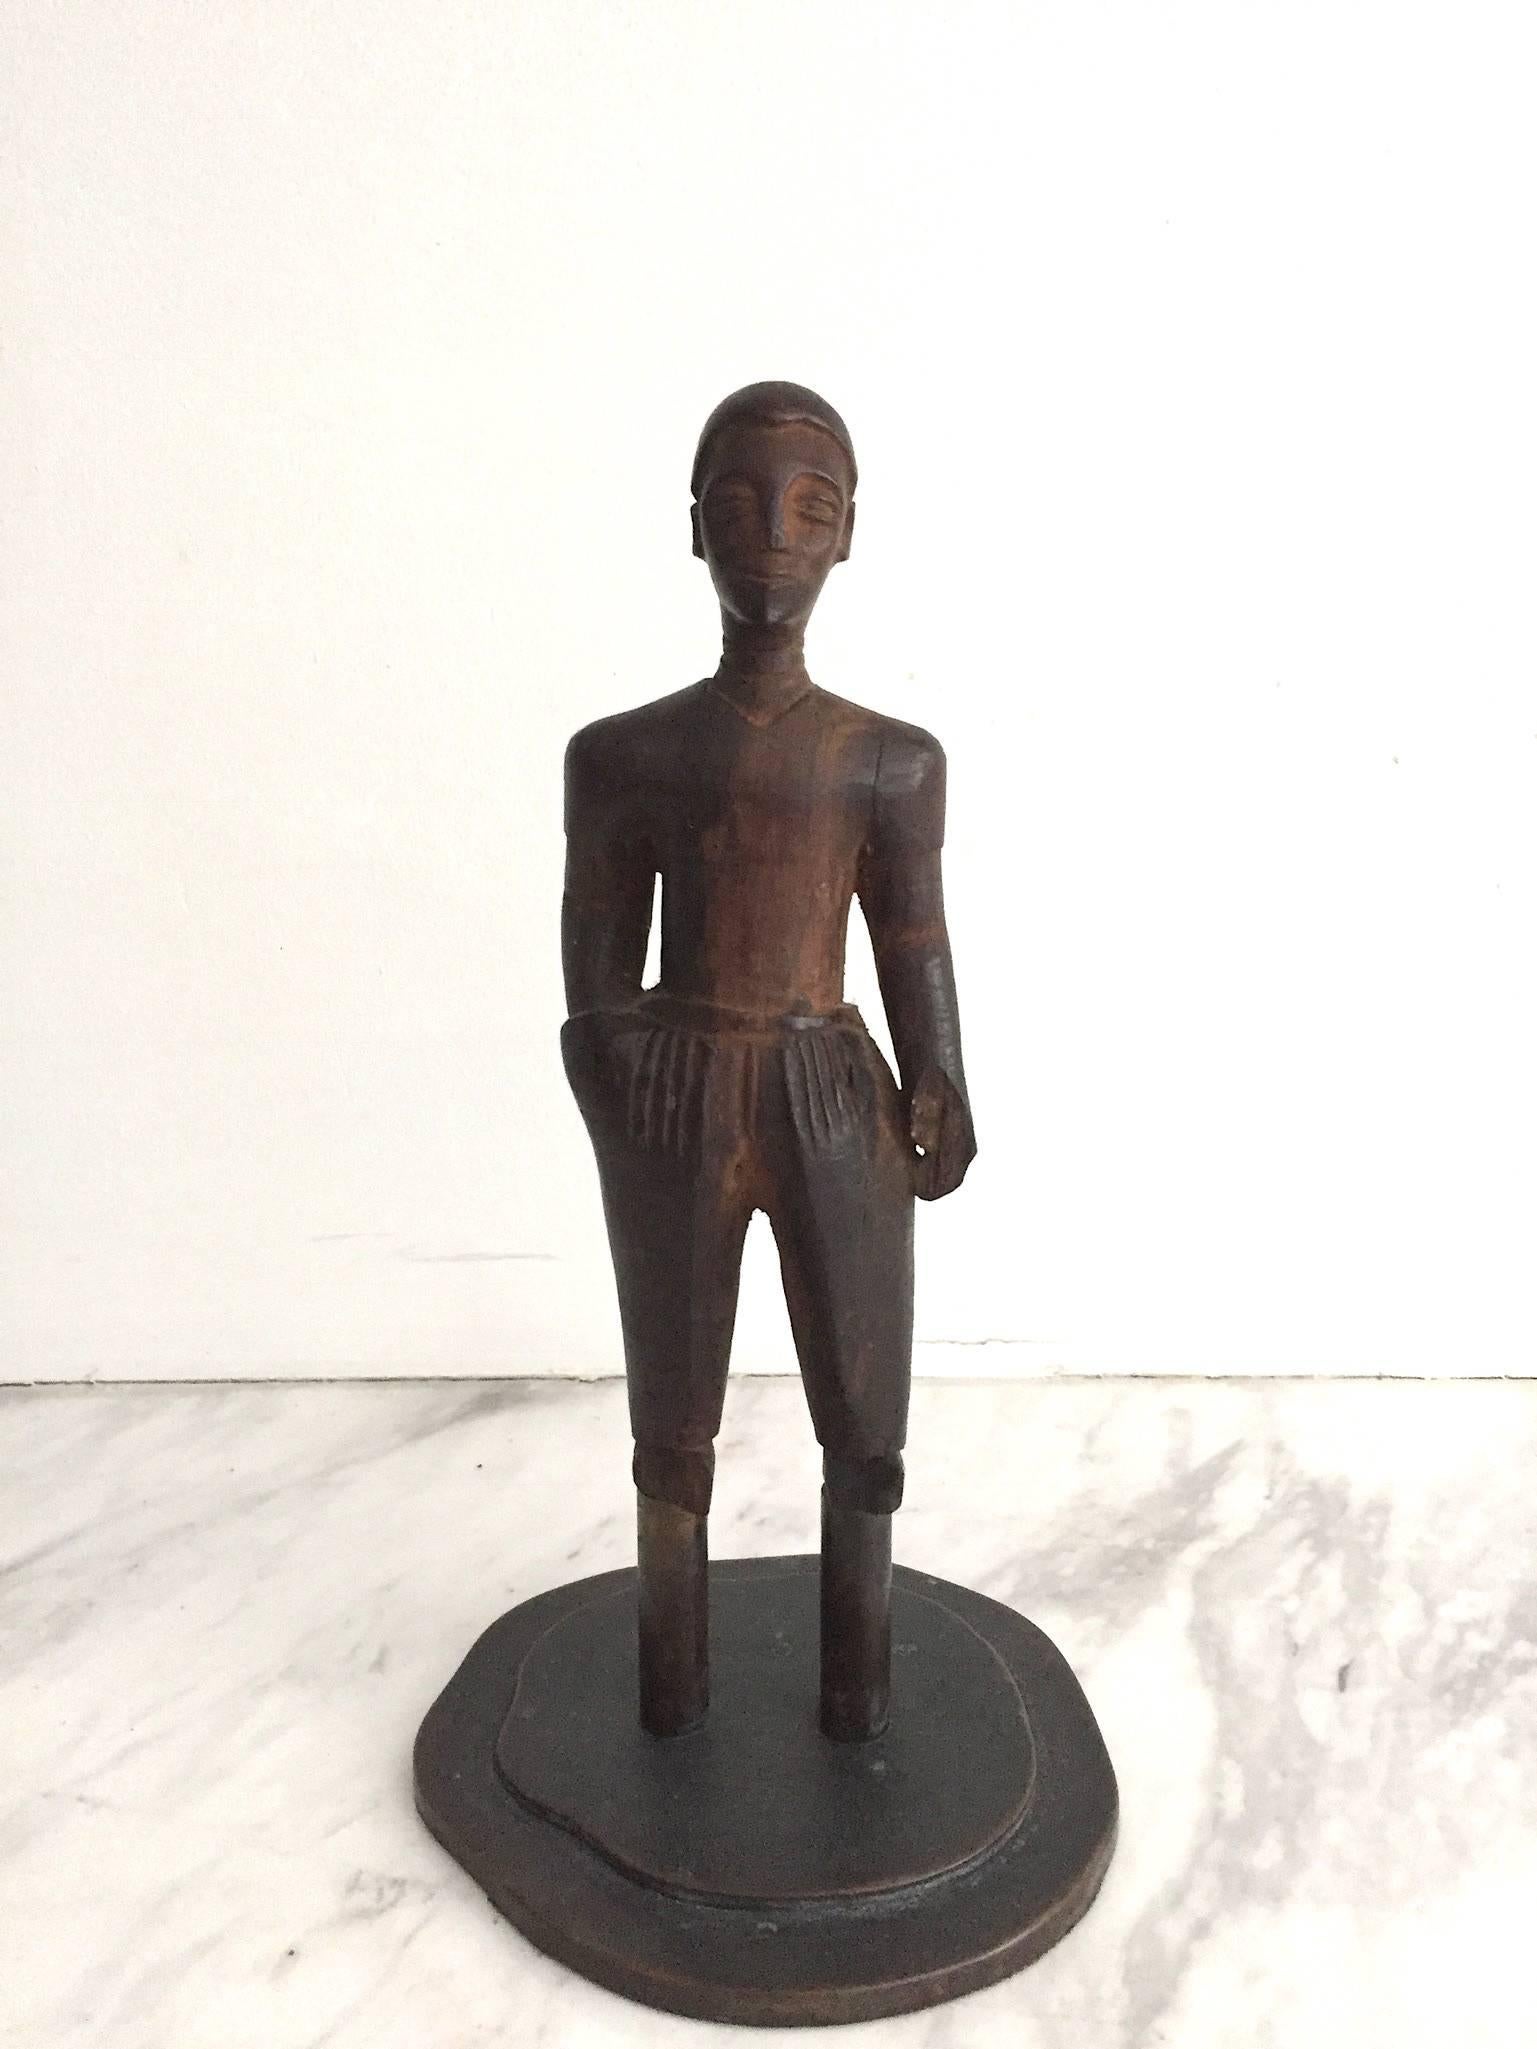 Hand-carved hardwood male figure on hand-made amorphous bronze base. Fantastic male figure with one hand in pocket and pleated trousers. The feet are removed where the figure is attached to the bronze base. Natural wear gives warmth and beauty to